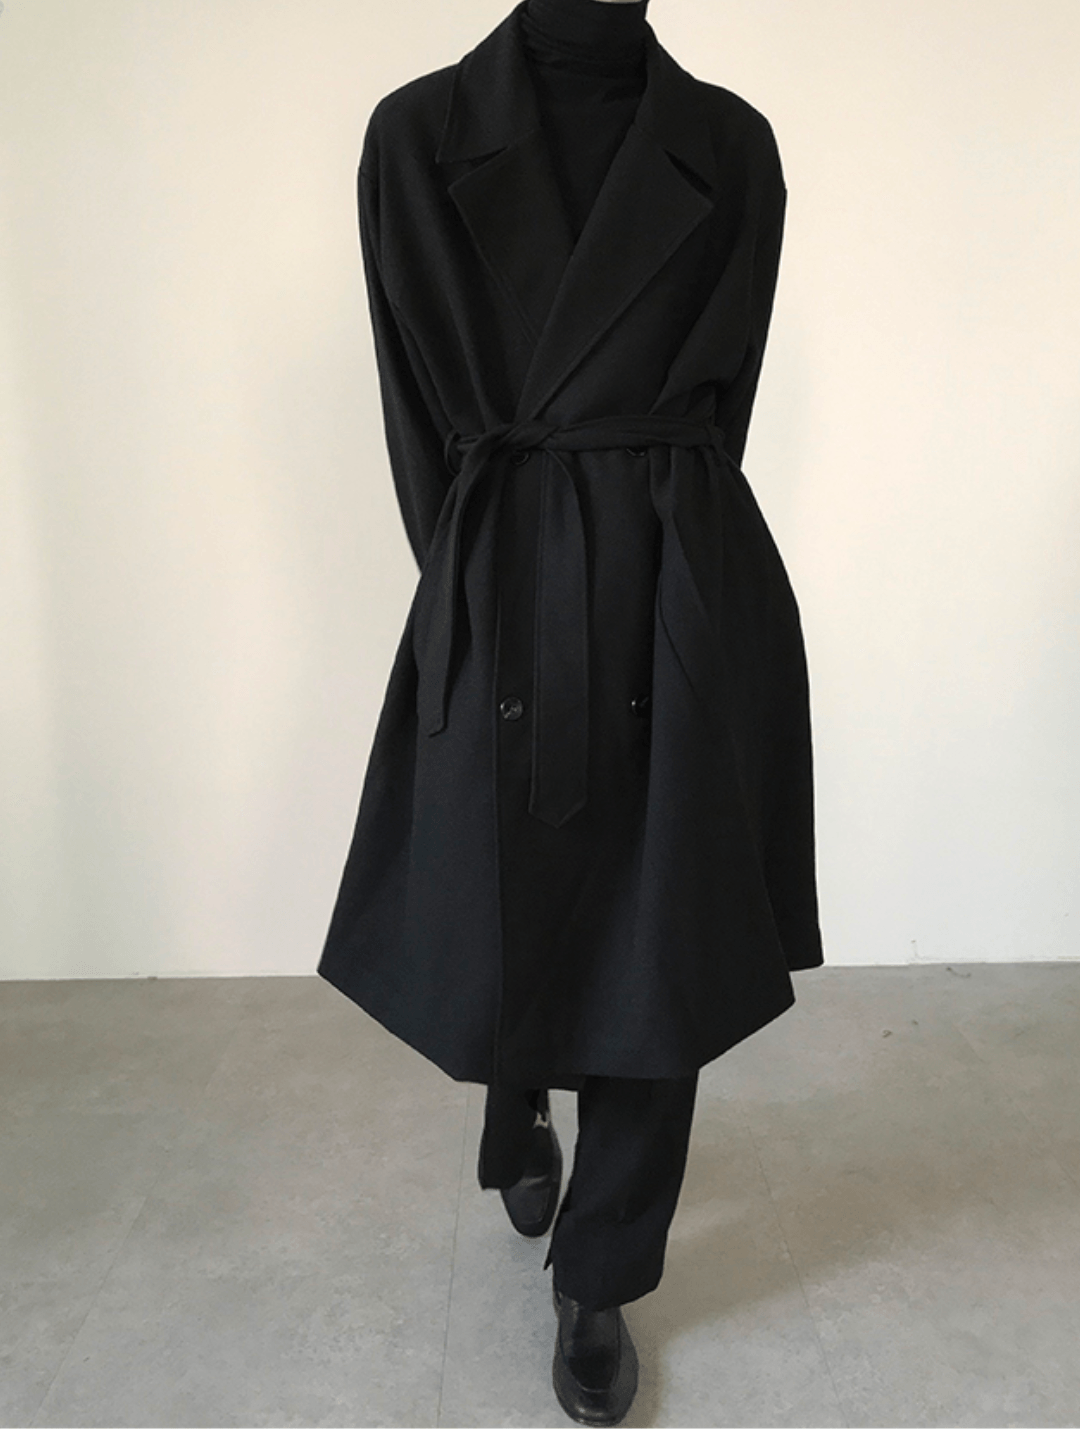 [COLN] Double Breasted Coat CL536